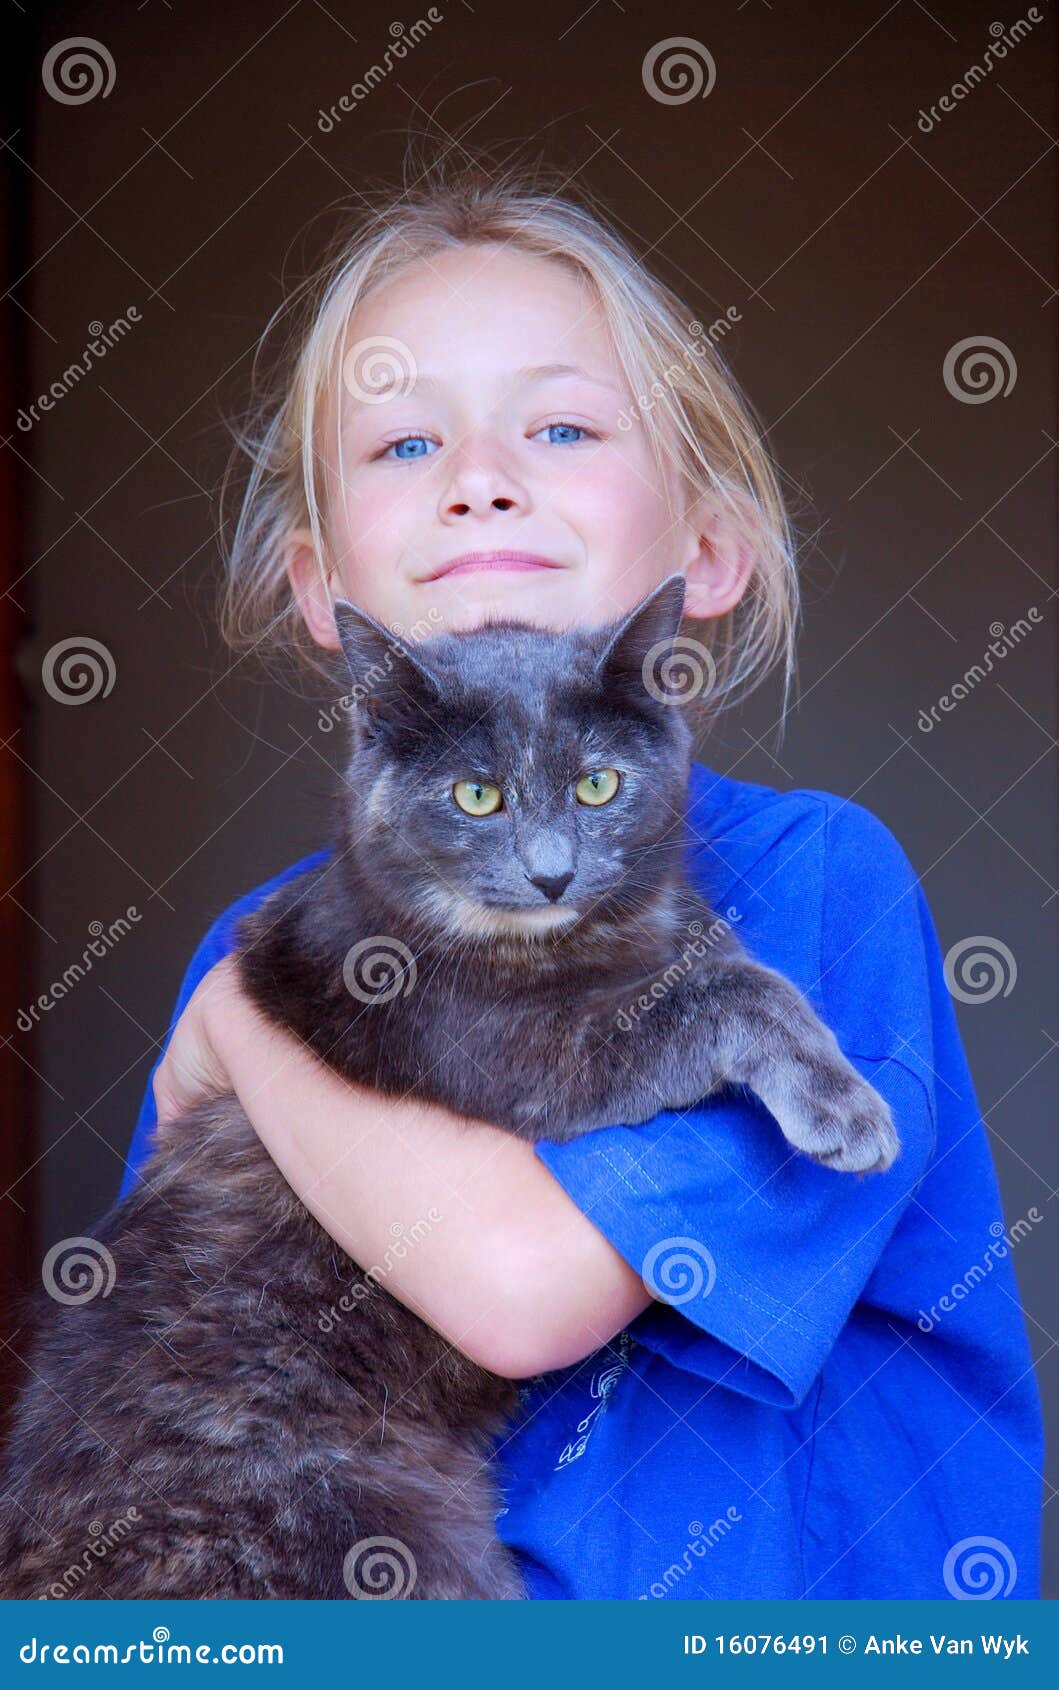 Little Girl With Cat Pet Stock Image Image 16076491